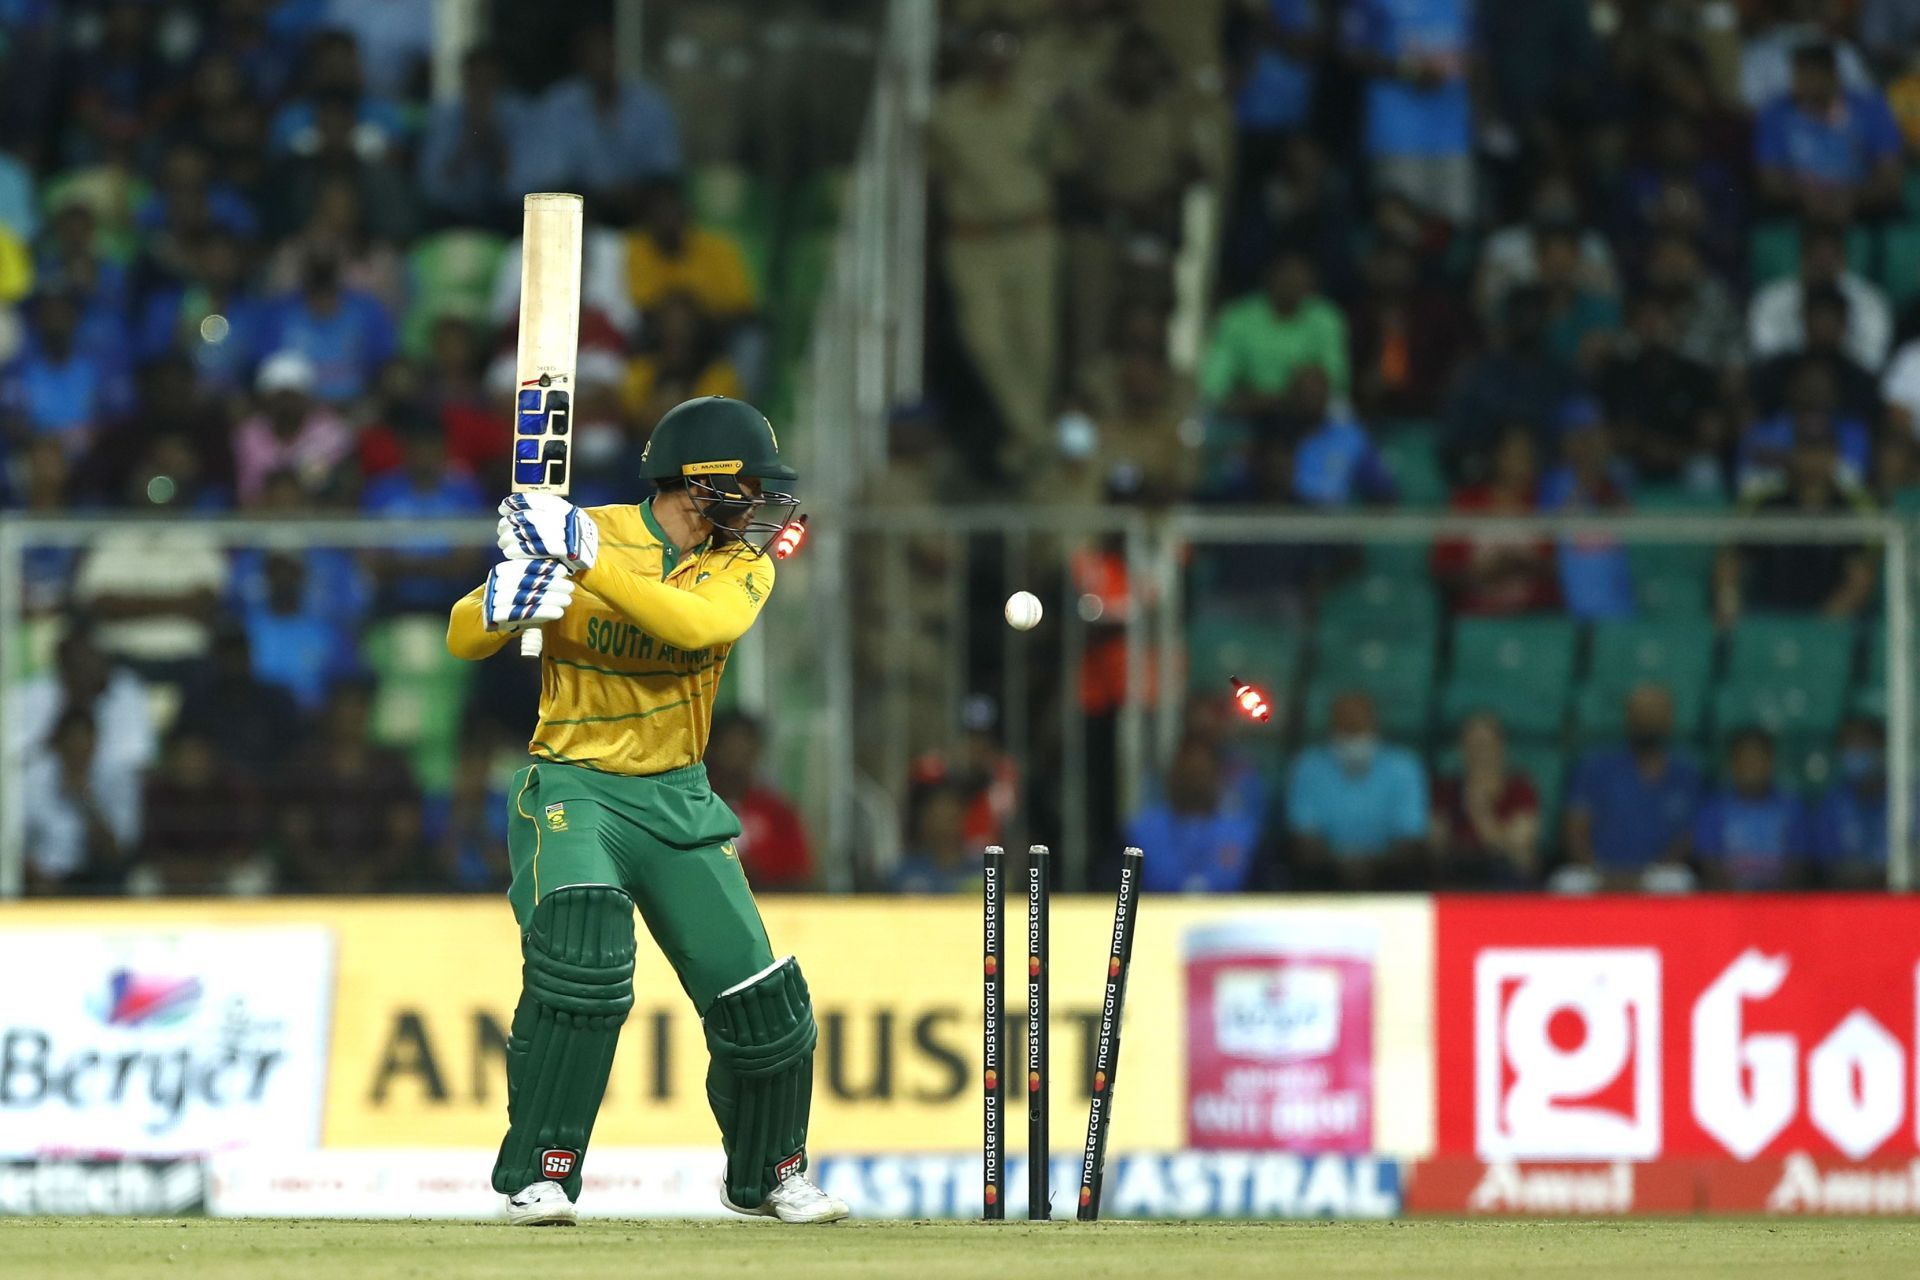 1st T20 International: India vs South Africa